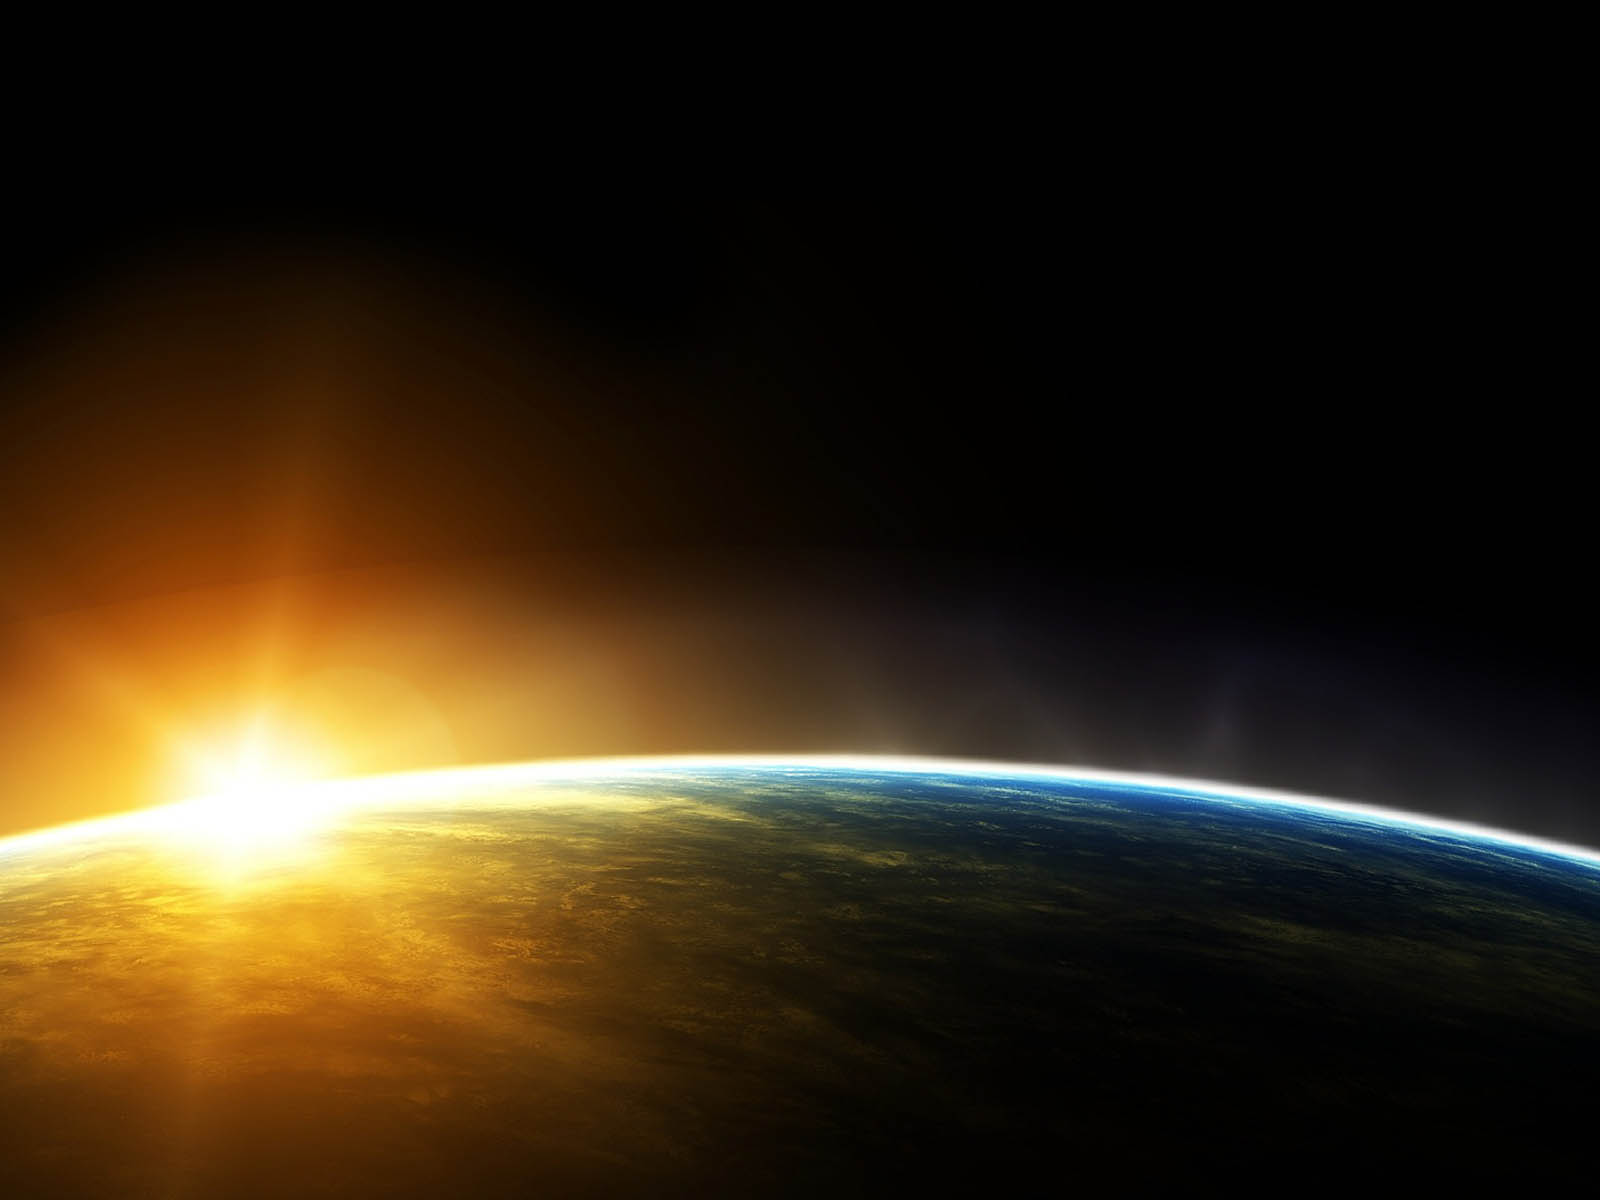 Sunrise In Space Wallpaper Image Photos Pictures And Background